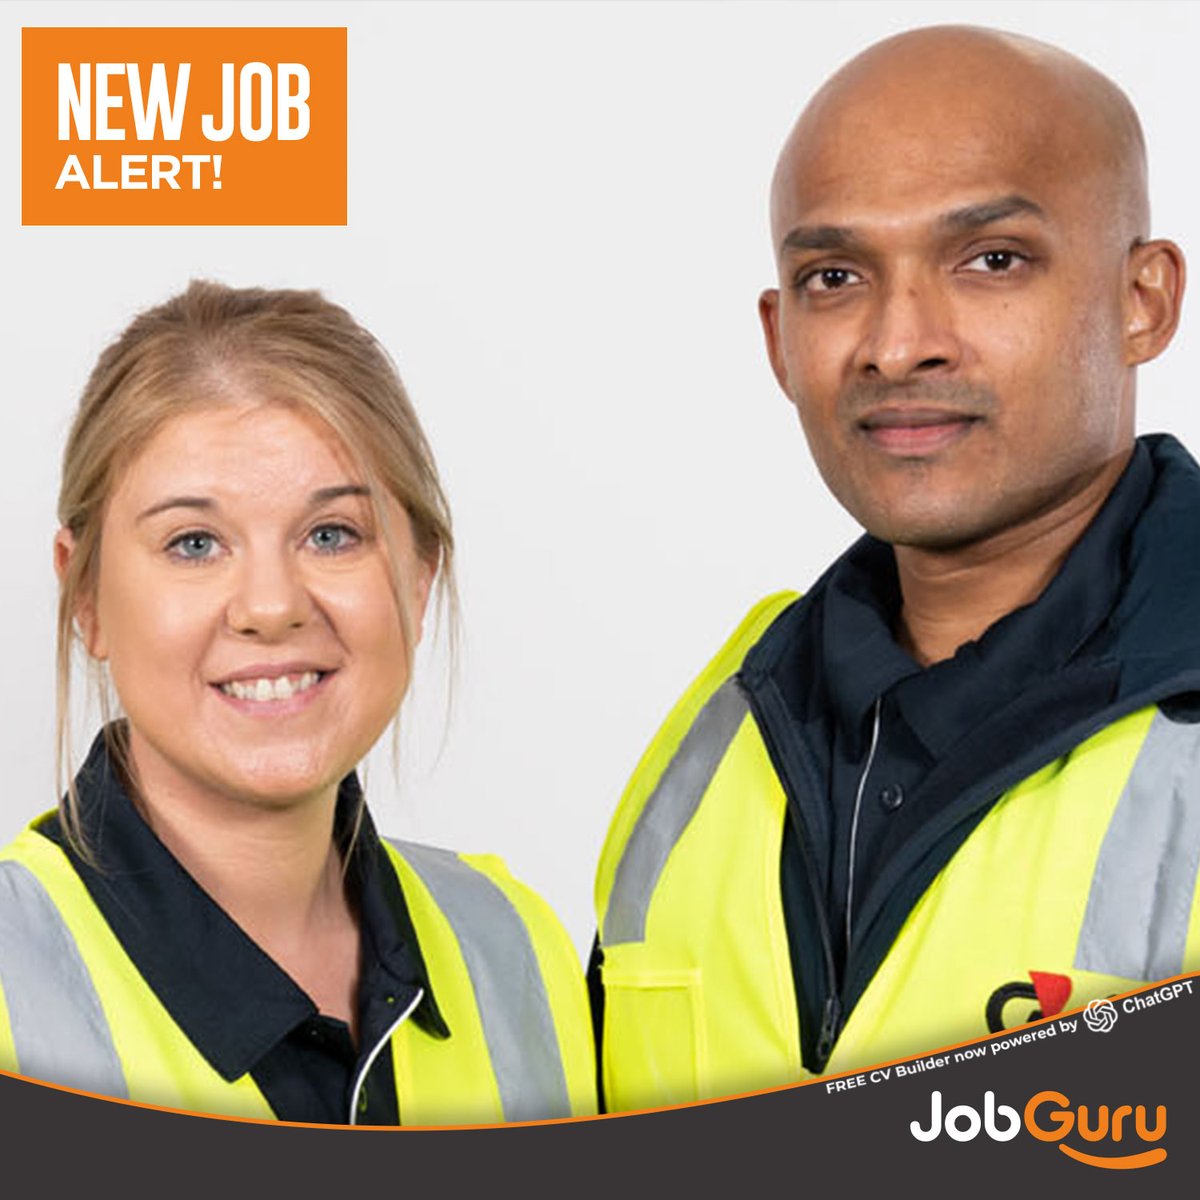 🔒 Join us at Synergy Security Solutions in Dublin 2! 🚨 Seeking experienced Security Officers for night shifts. Competitive pay, benefits, and opportunities for growth. Apply now! #SecurityJobs #Dublin #NowHiring 🔐🌟jobguru.ie/vacancy/securi…